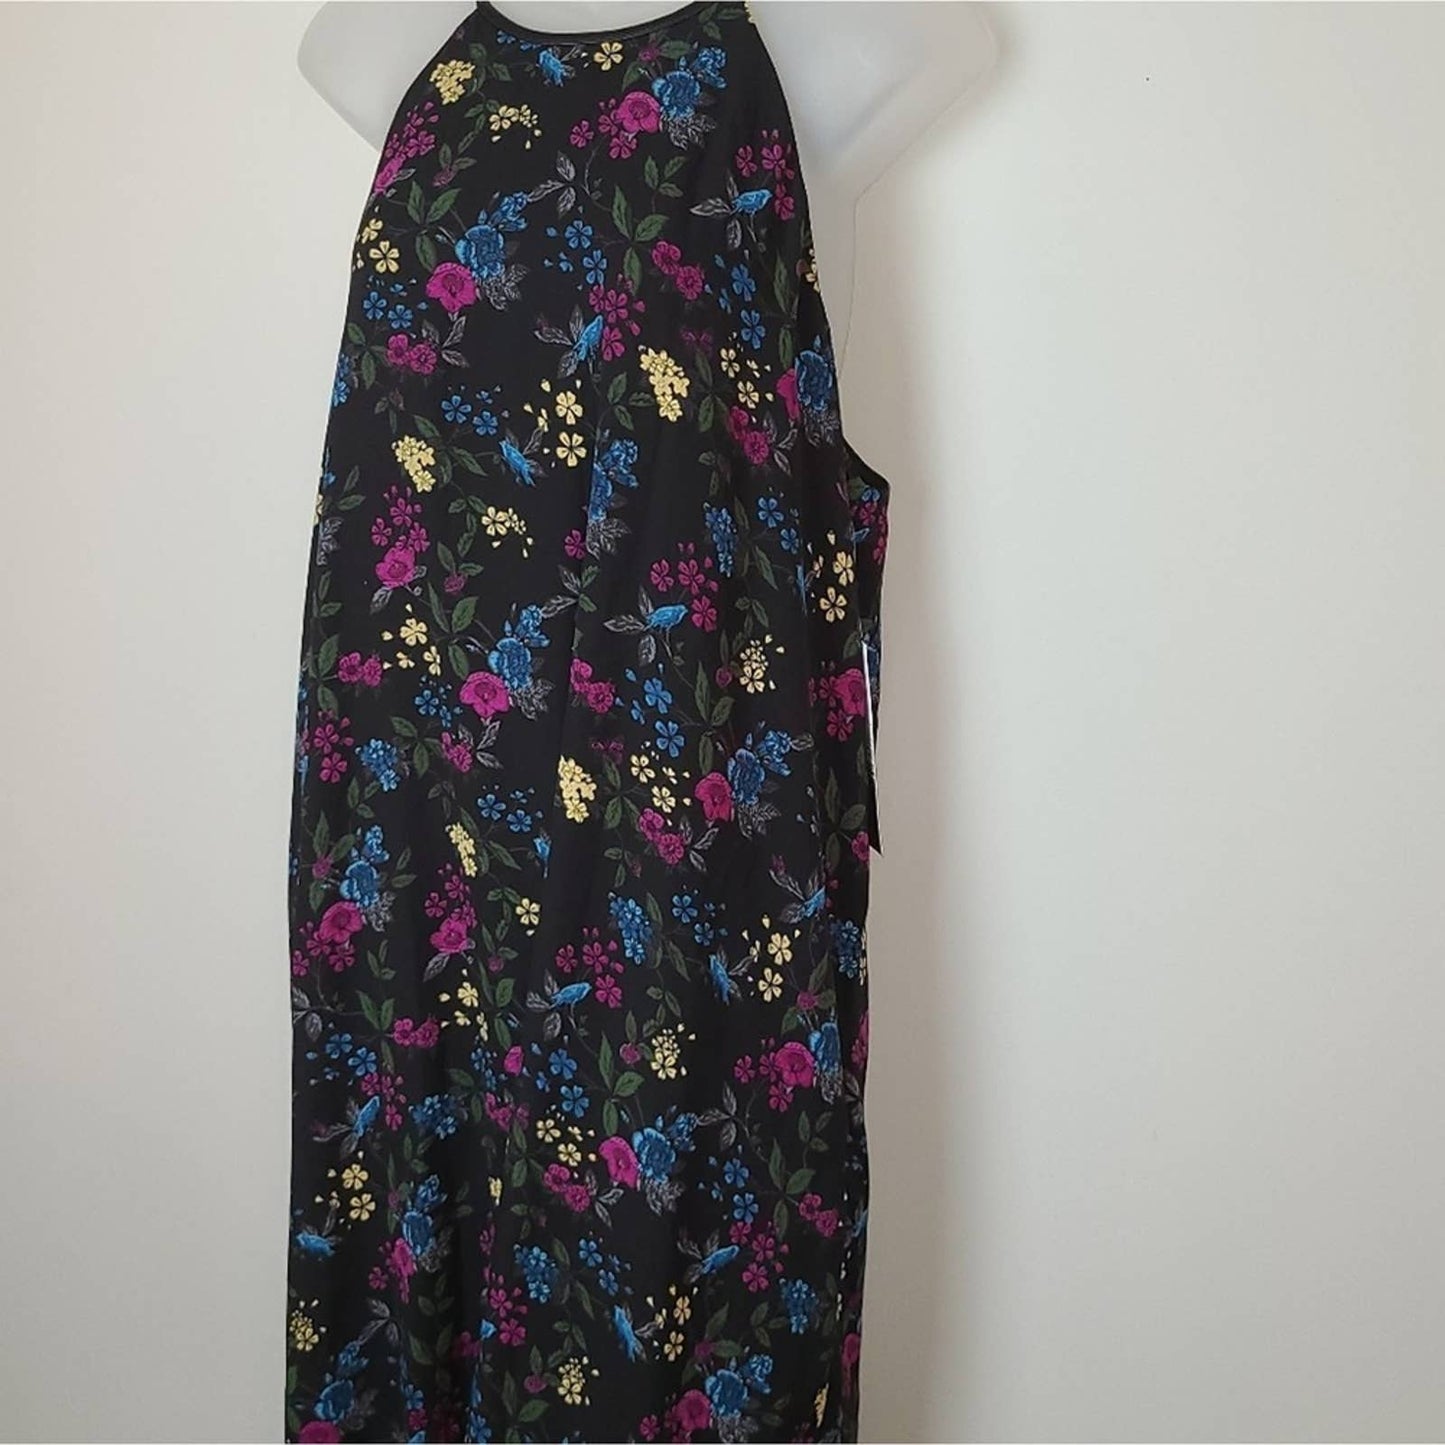 Kensie New with Tag sleeveless  bird floral dress